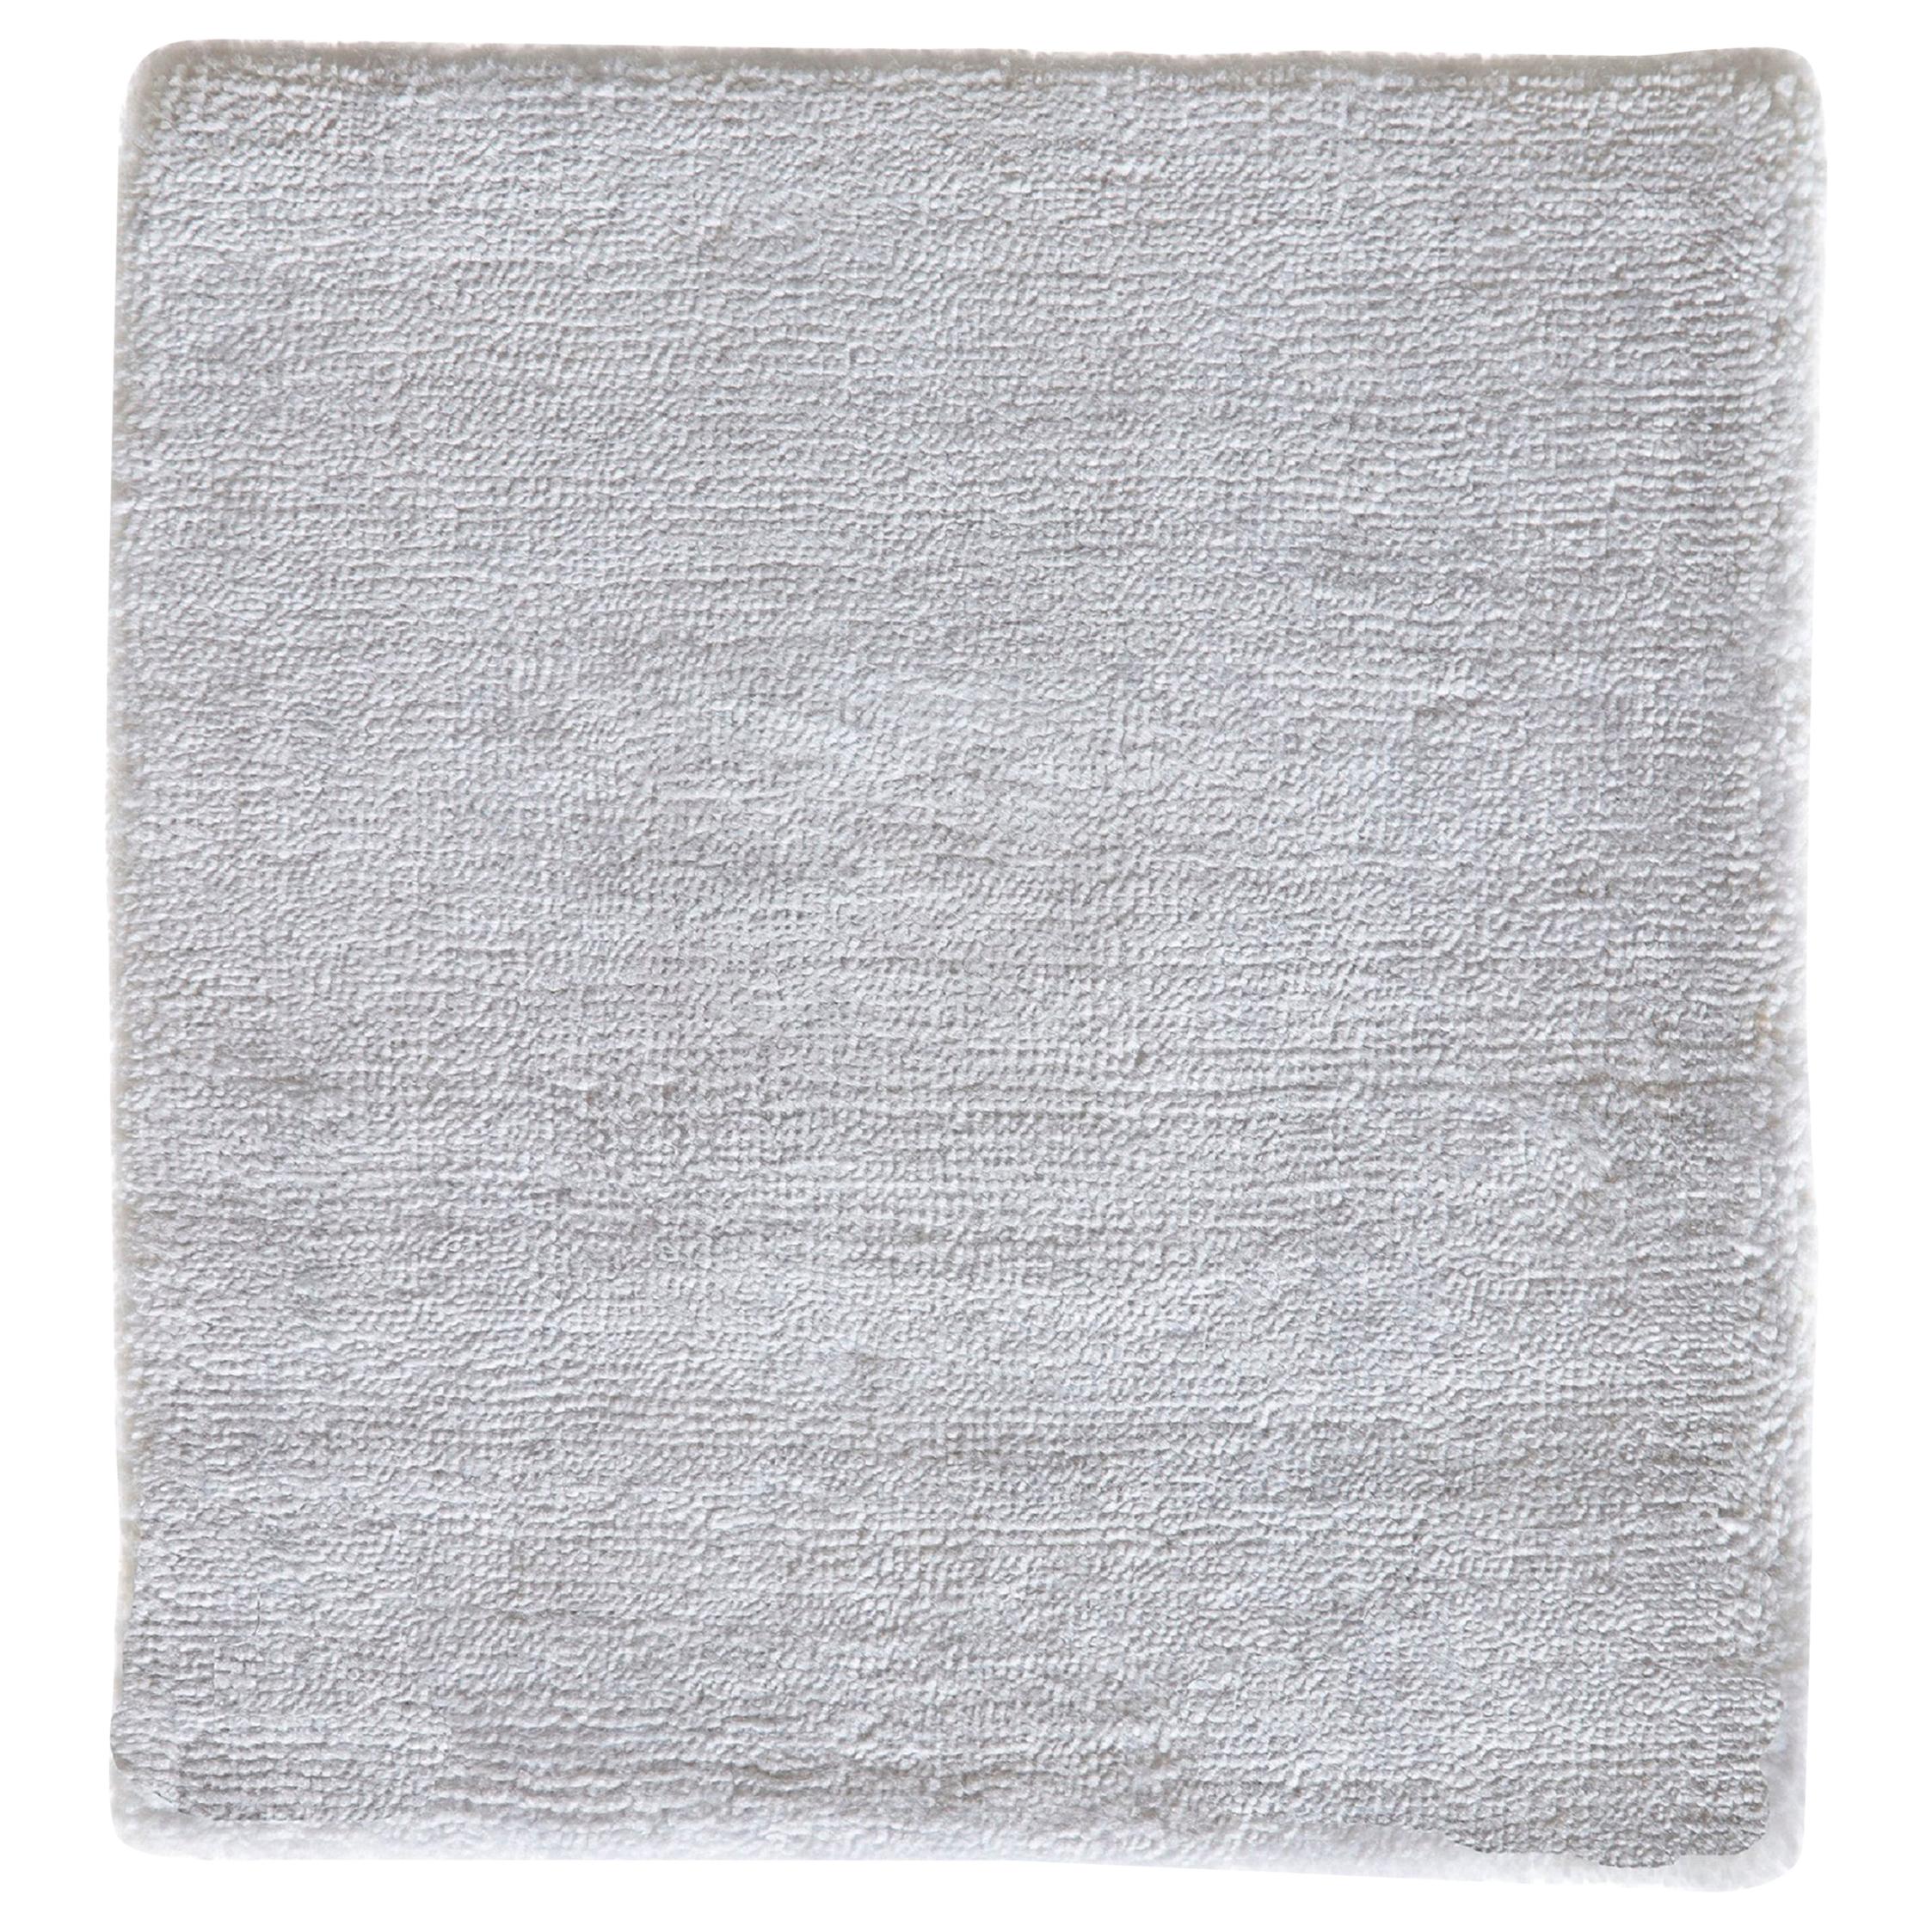 Minimalist Contemporary Natural Bamboo Silk White Hand-Loomed Square Rug